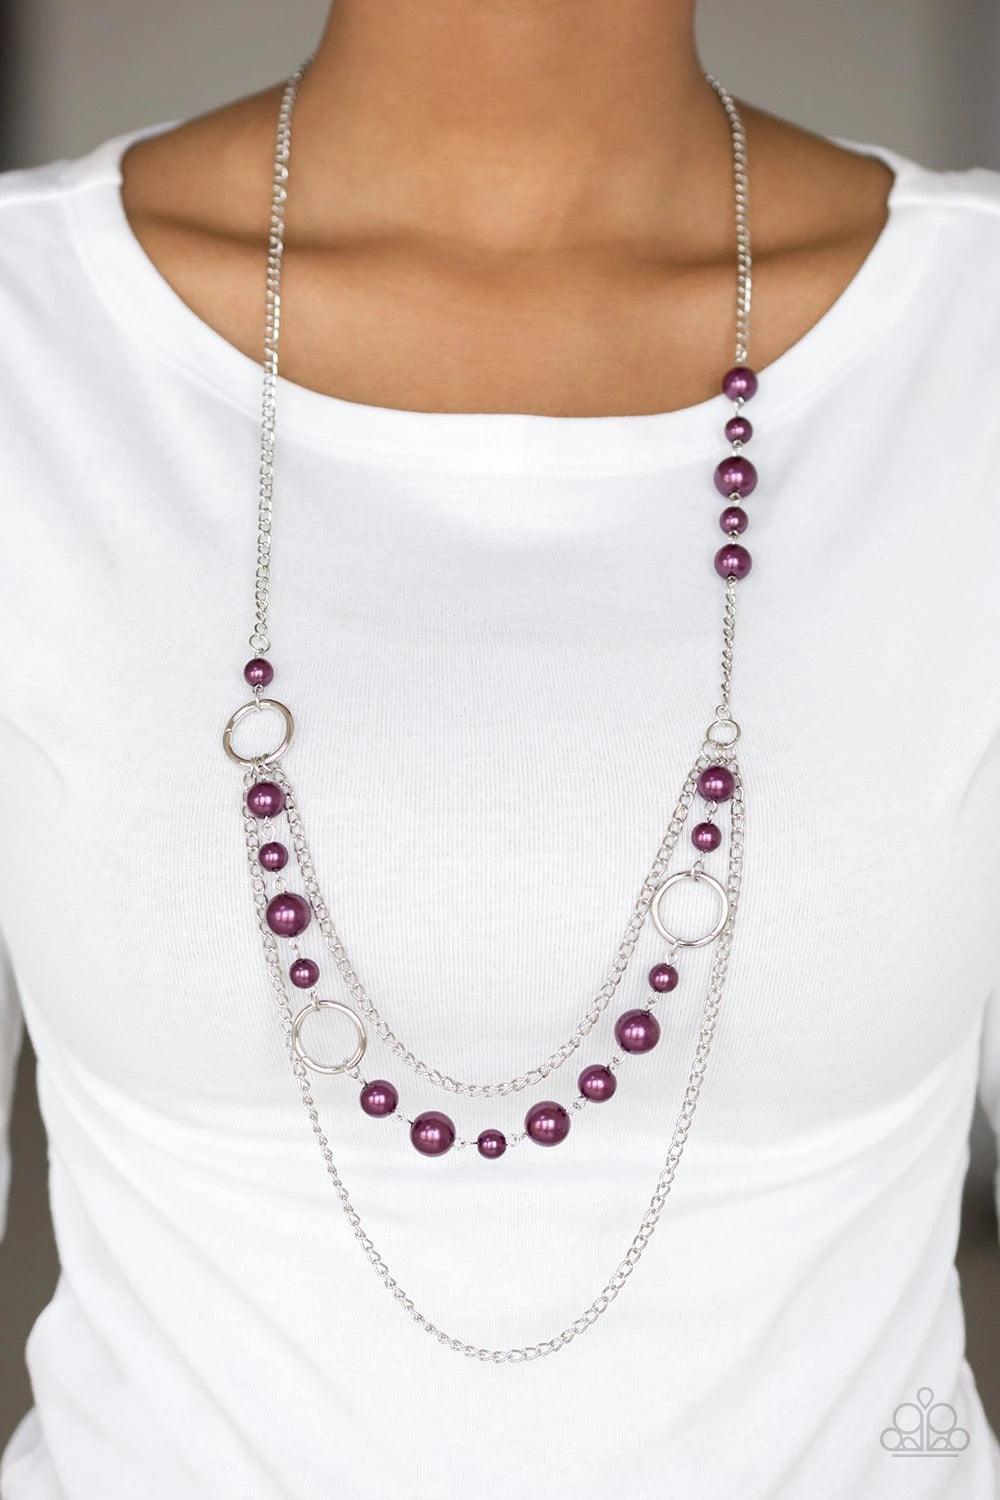 Paparazzi Accessories Party Dress Princess - Purple Pearly purple beads and shimmery silver hoops trickle along glistening silver chains, creating mismatched layers down the chest. Features an adjustable clasp closure. Jewelry